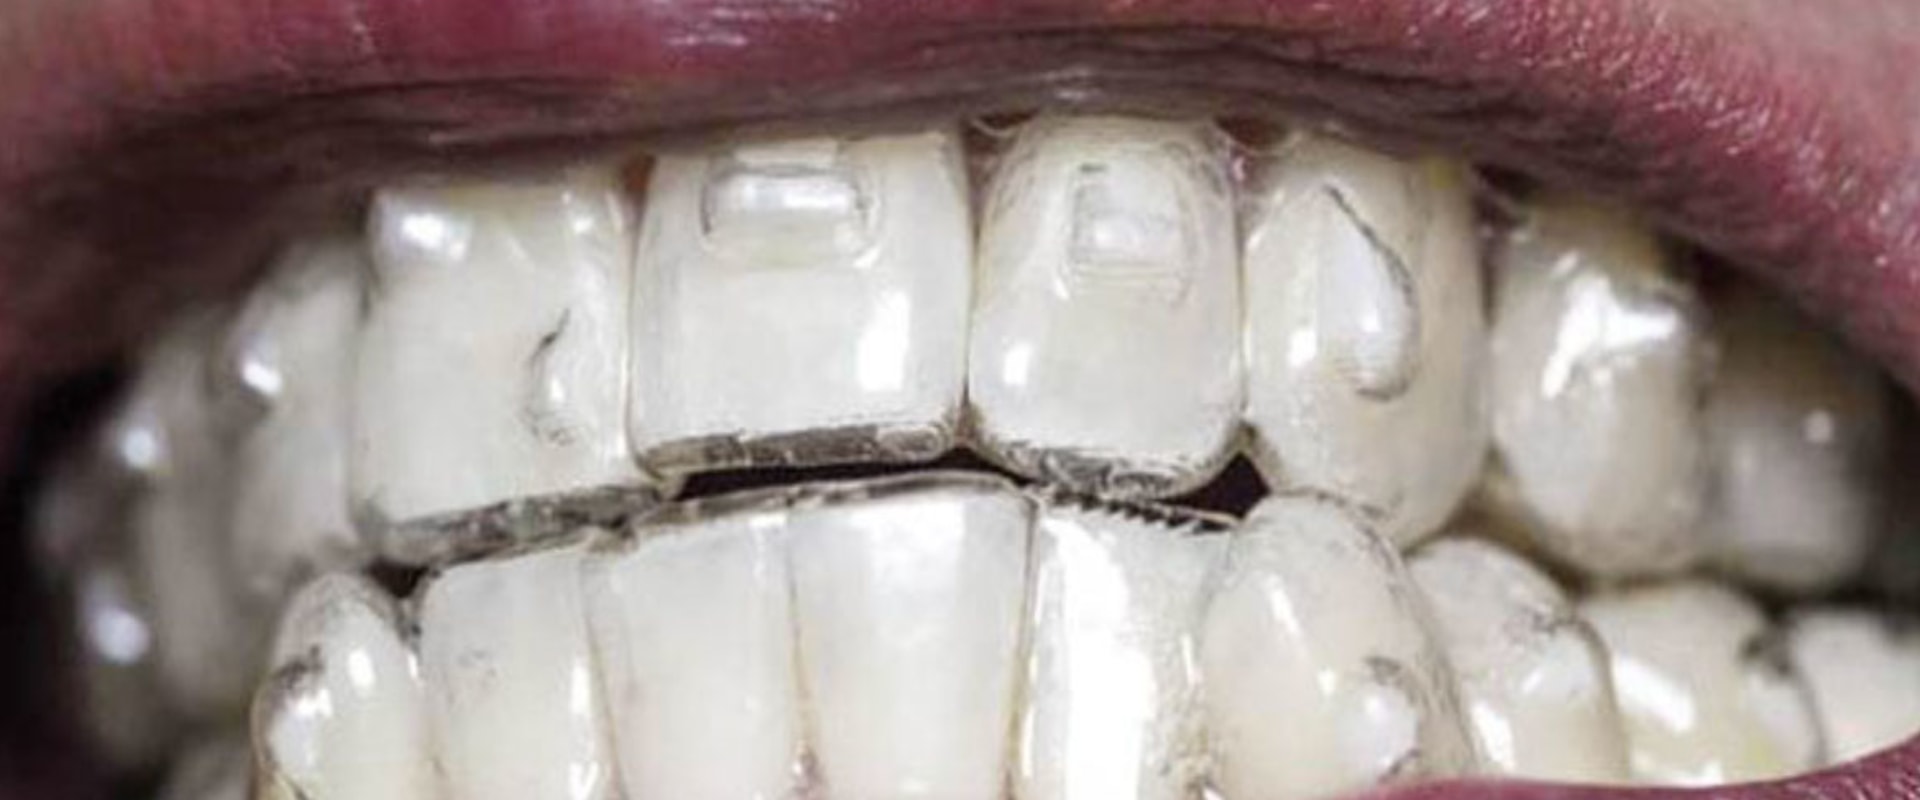 What Are Invisalign Attachments and How Do They Help Straighten Teeth?